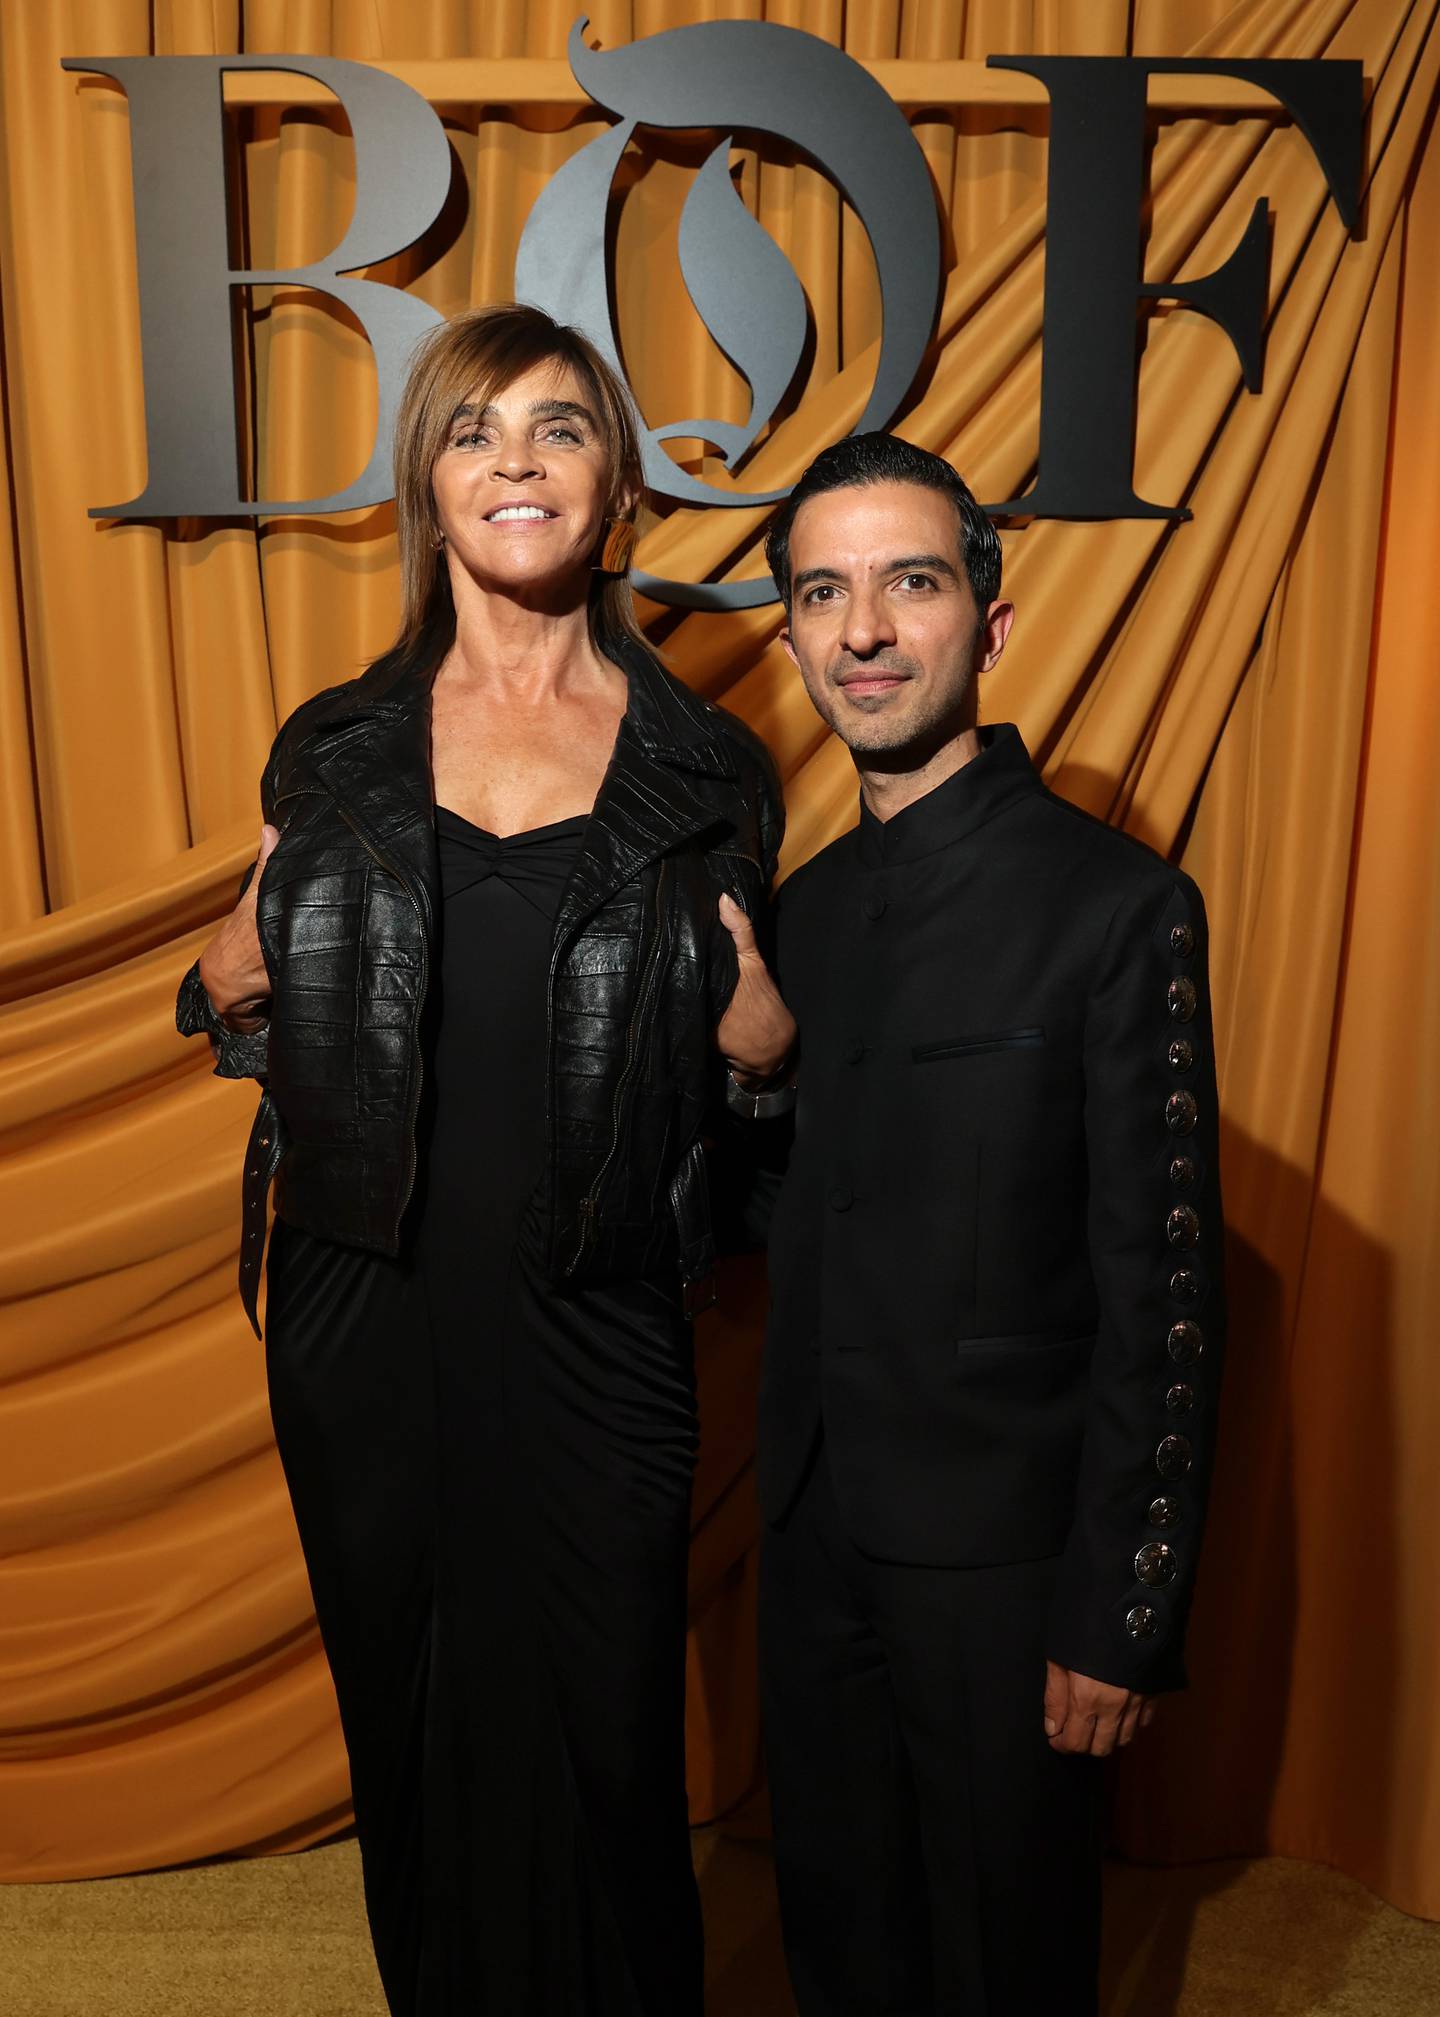 Imran Amed, founder & chief executive, from Canada, and Carine Roitfeld, editor-in-chief, from France, attend the #BoF500 gala during Paris Fashion Week.